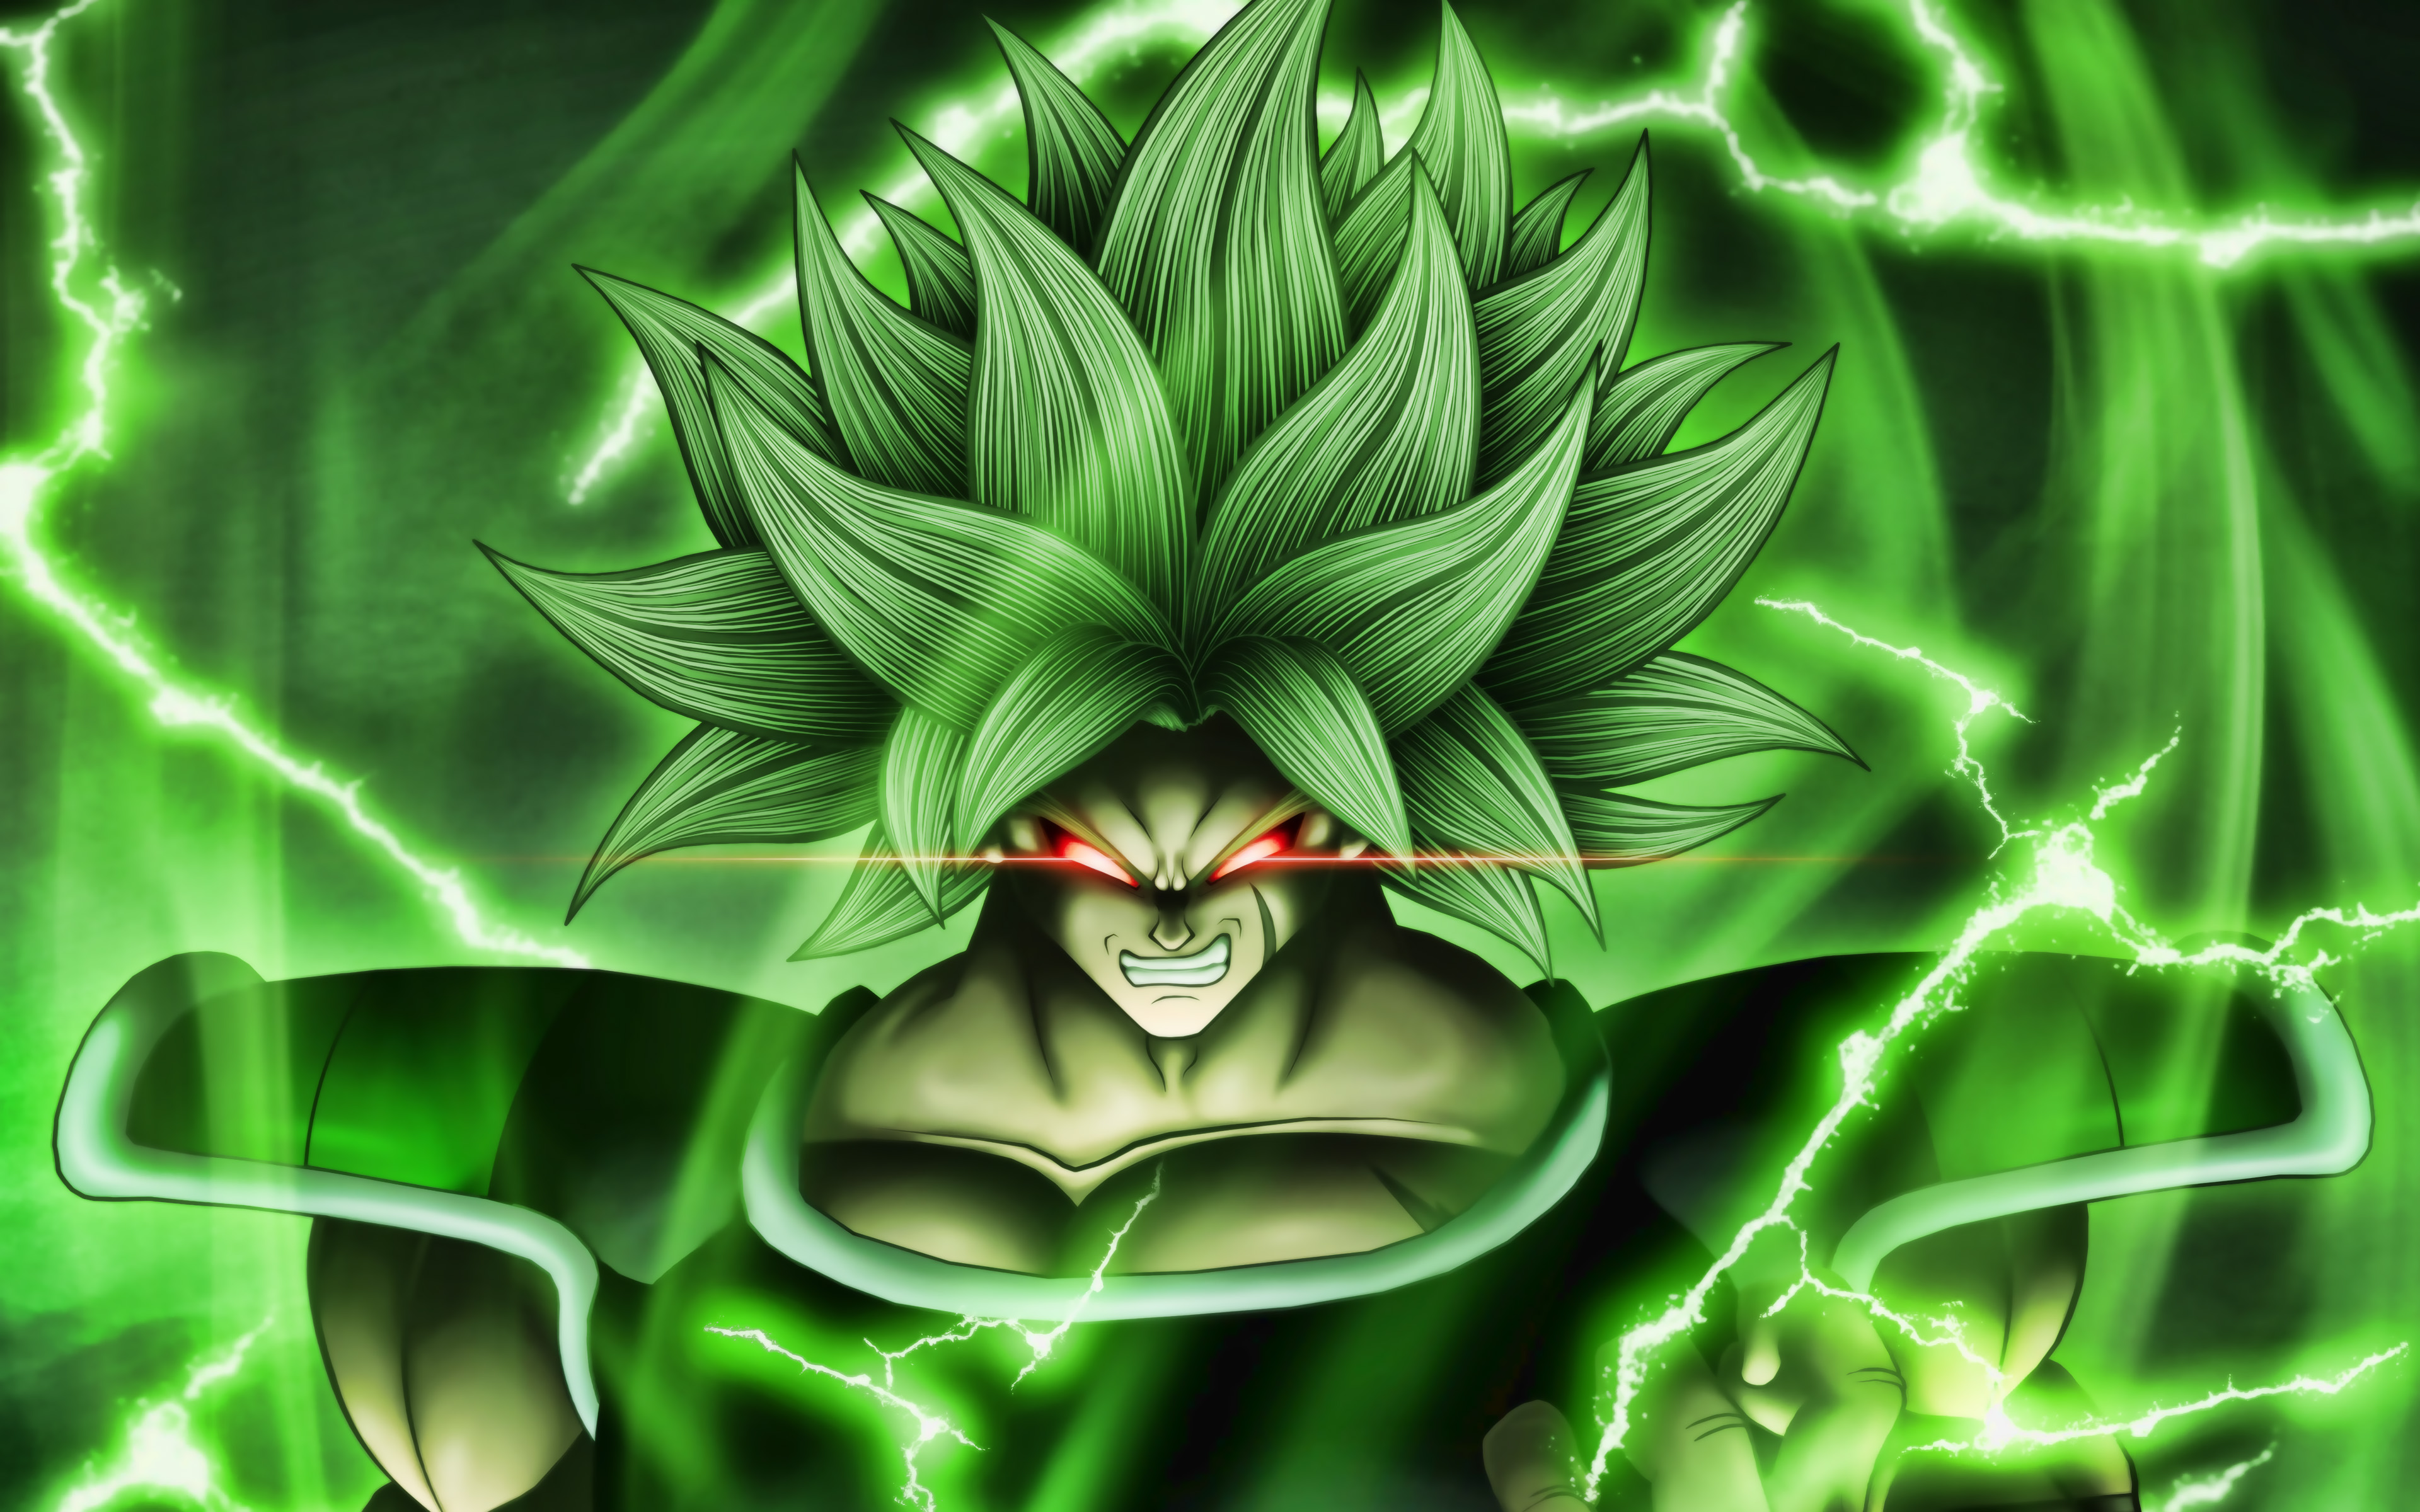 Download wallpaper 4k, Broly, green lightings, Dragon Ball, DBS, Dragon Ball Super, artwork, DBS characters, Broly 4k for desktop with resolution 3840x2400. High Quality HD picture wallpaper